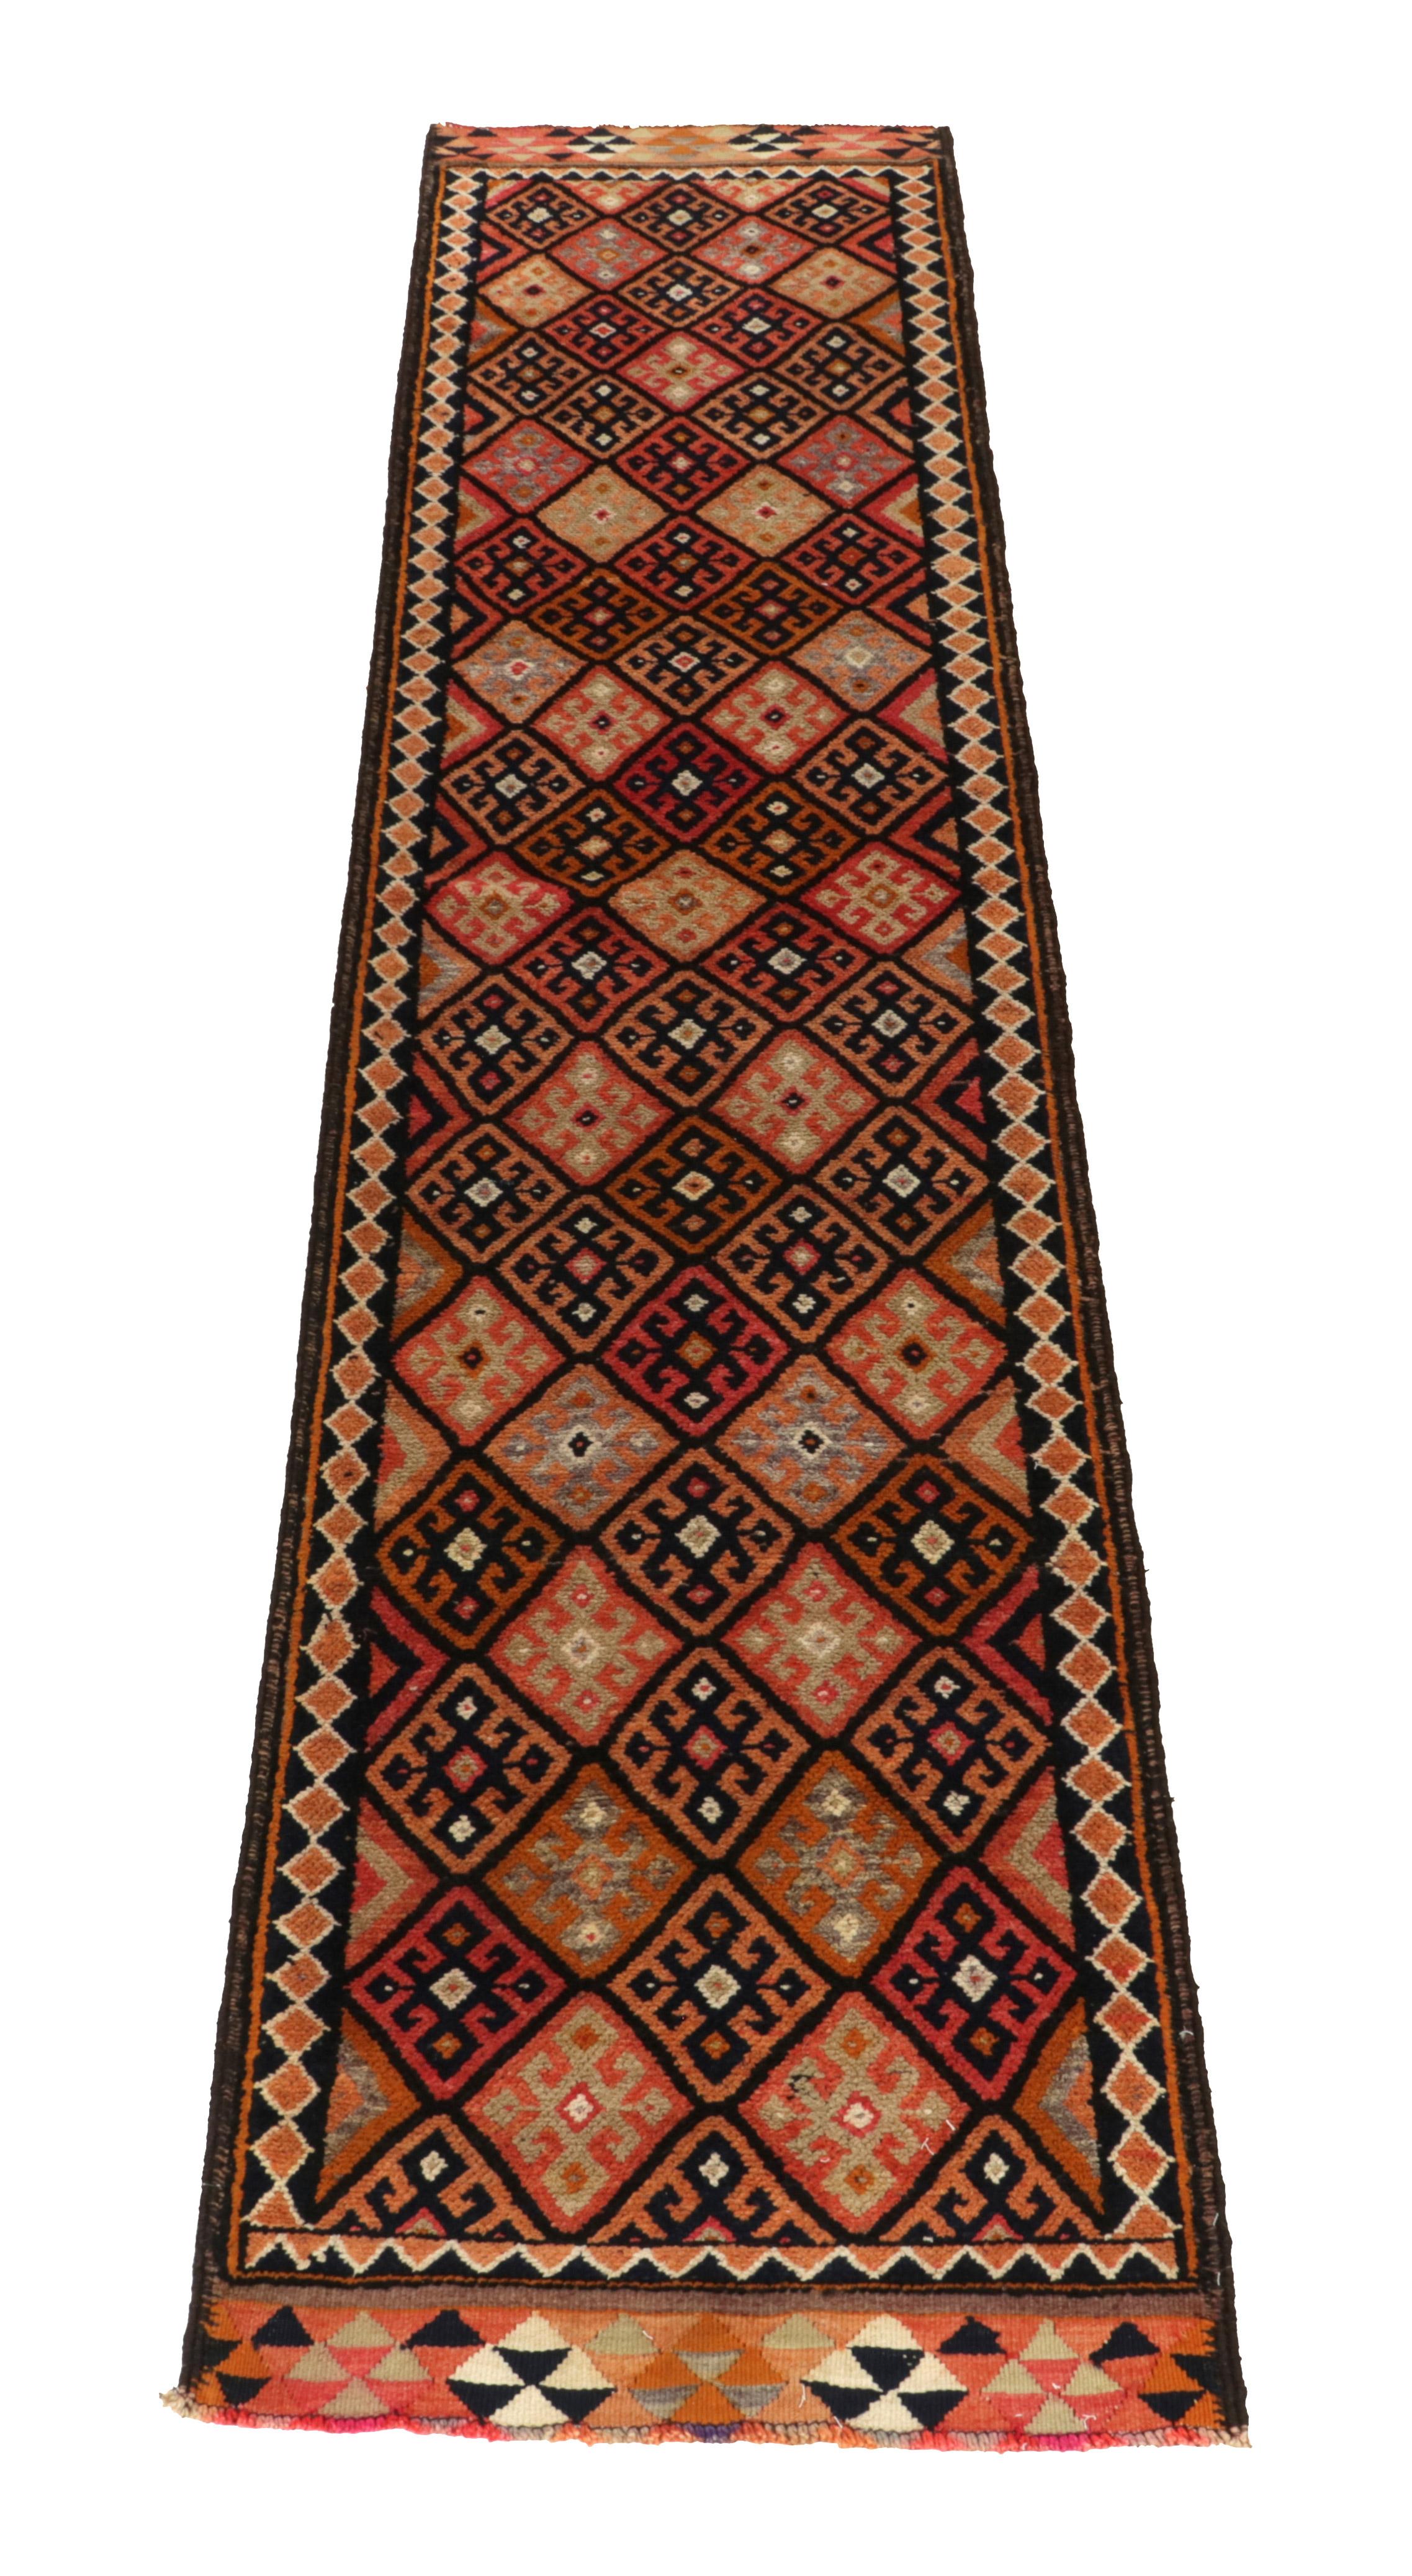 Hand-knotted in wool, a 3x13 runner from Rug & Kilim’s newest bold curation of rare tribal rug designs.

Originating from Turkey circa 1950-1960, the field enjoys diamond patterns encasing traditional motifs in warm red, orange, and vibrant hues